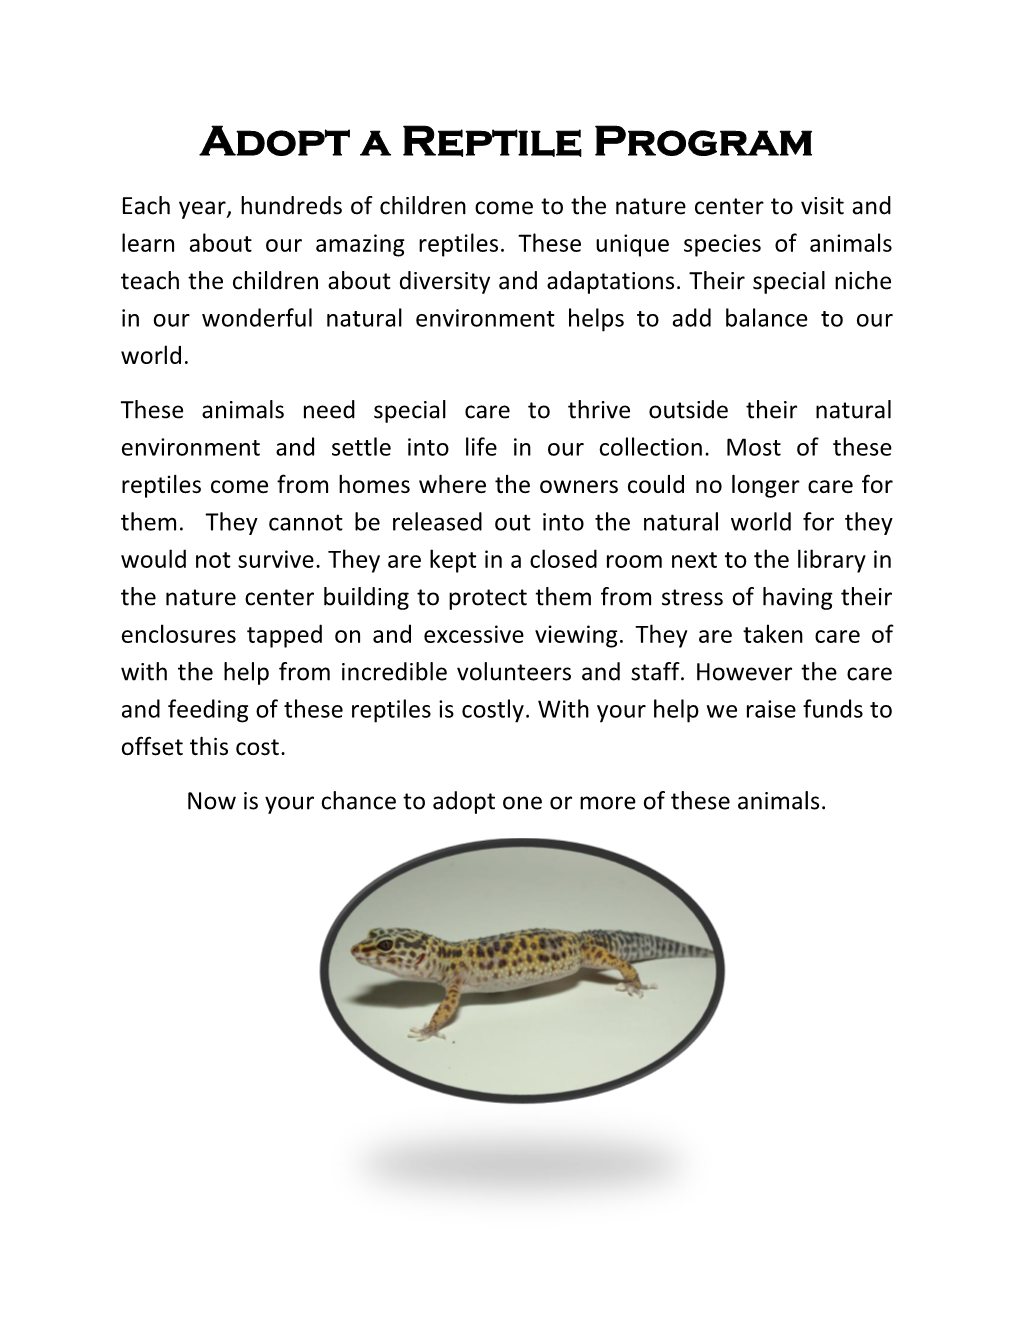 Adopt-A-Reptile Program Packet